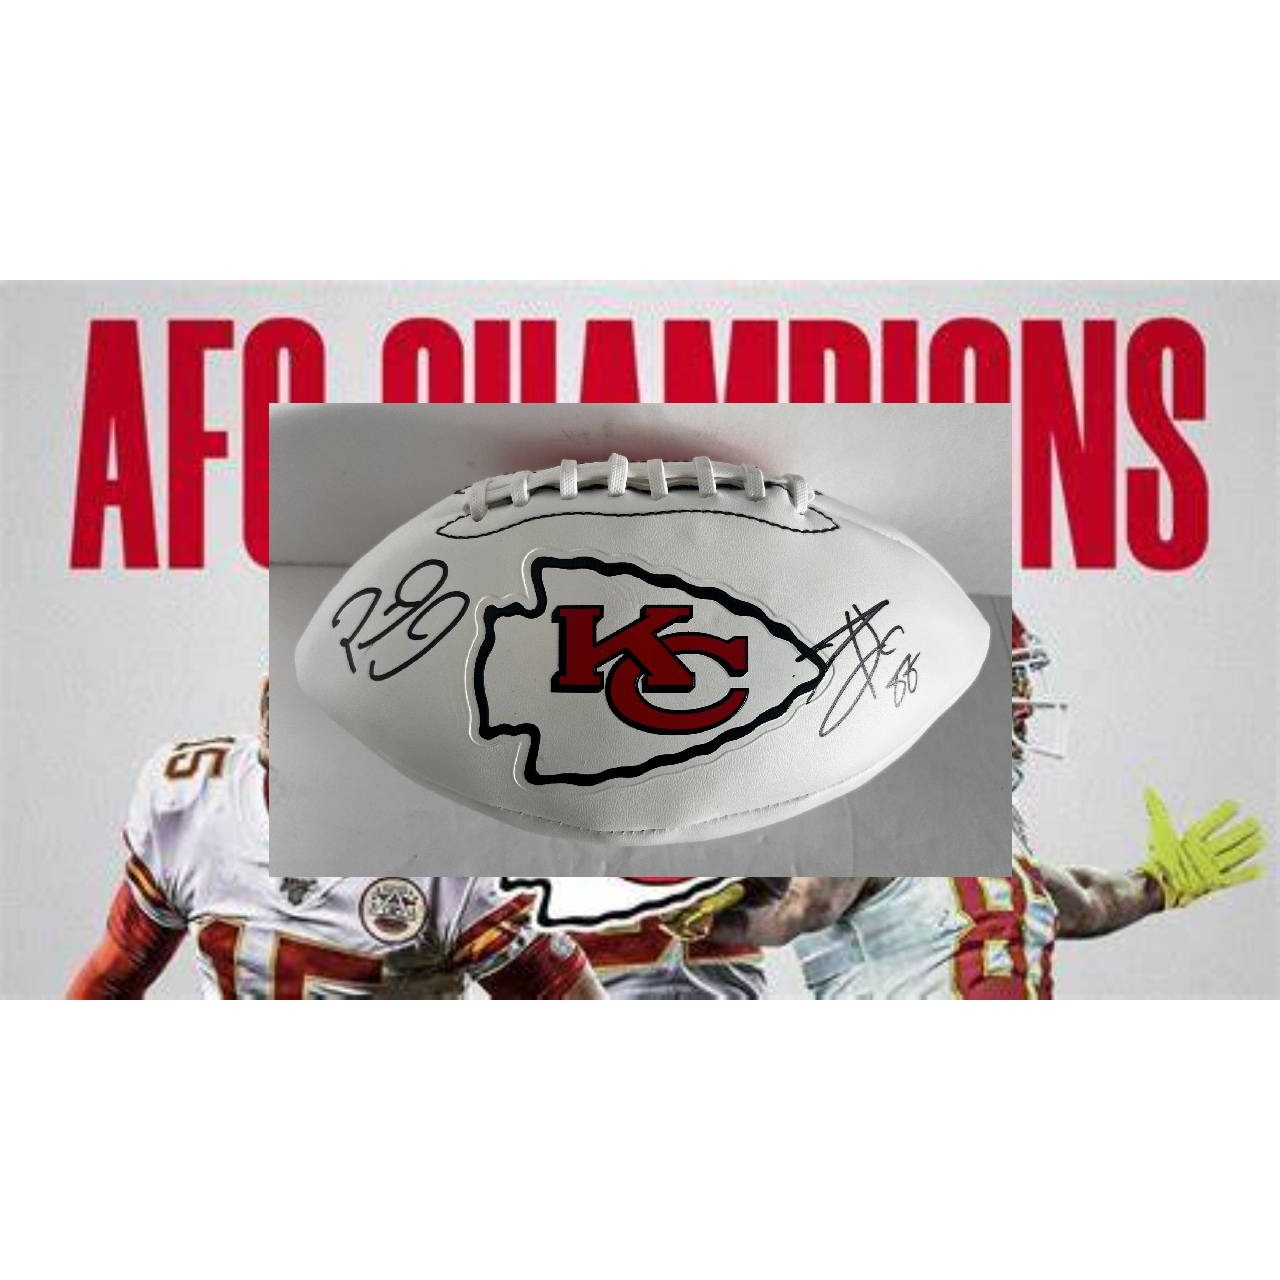 Travis Kelce Patrick Mahomes Kansas City Chiefs full size football sign with proof